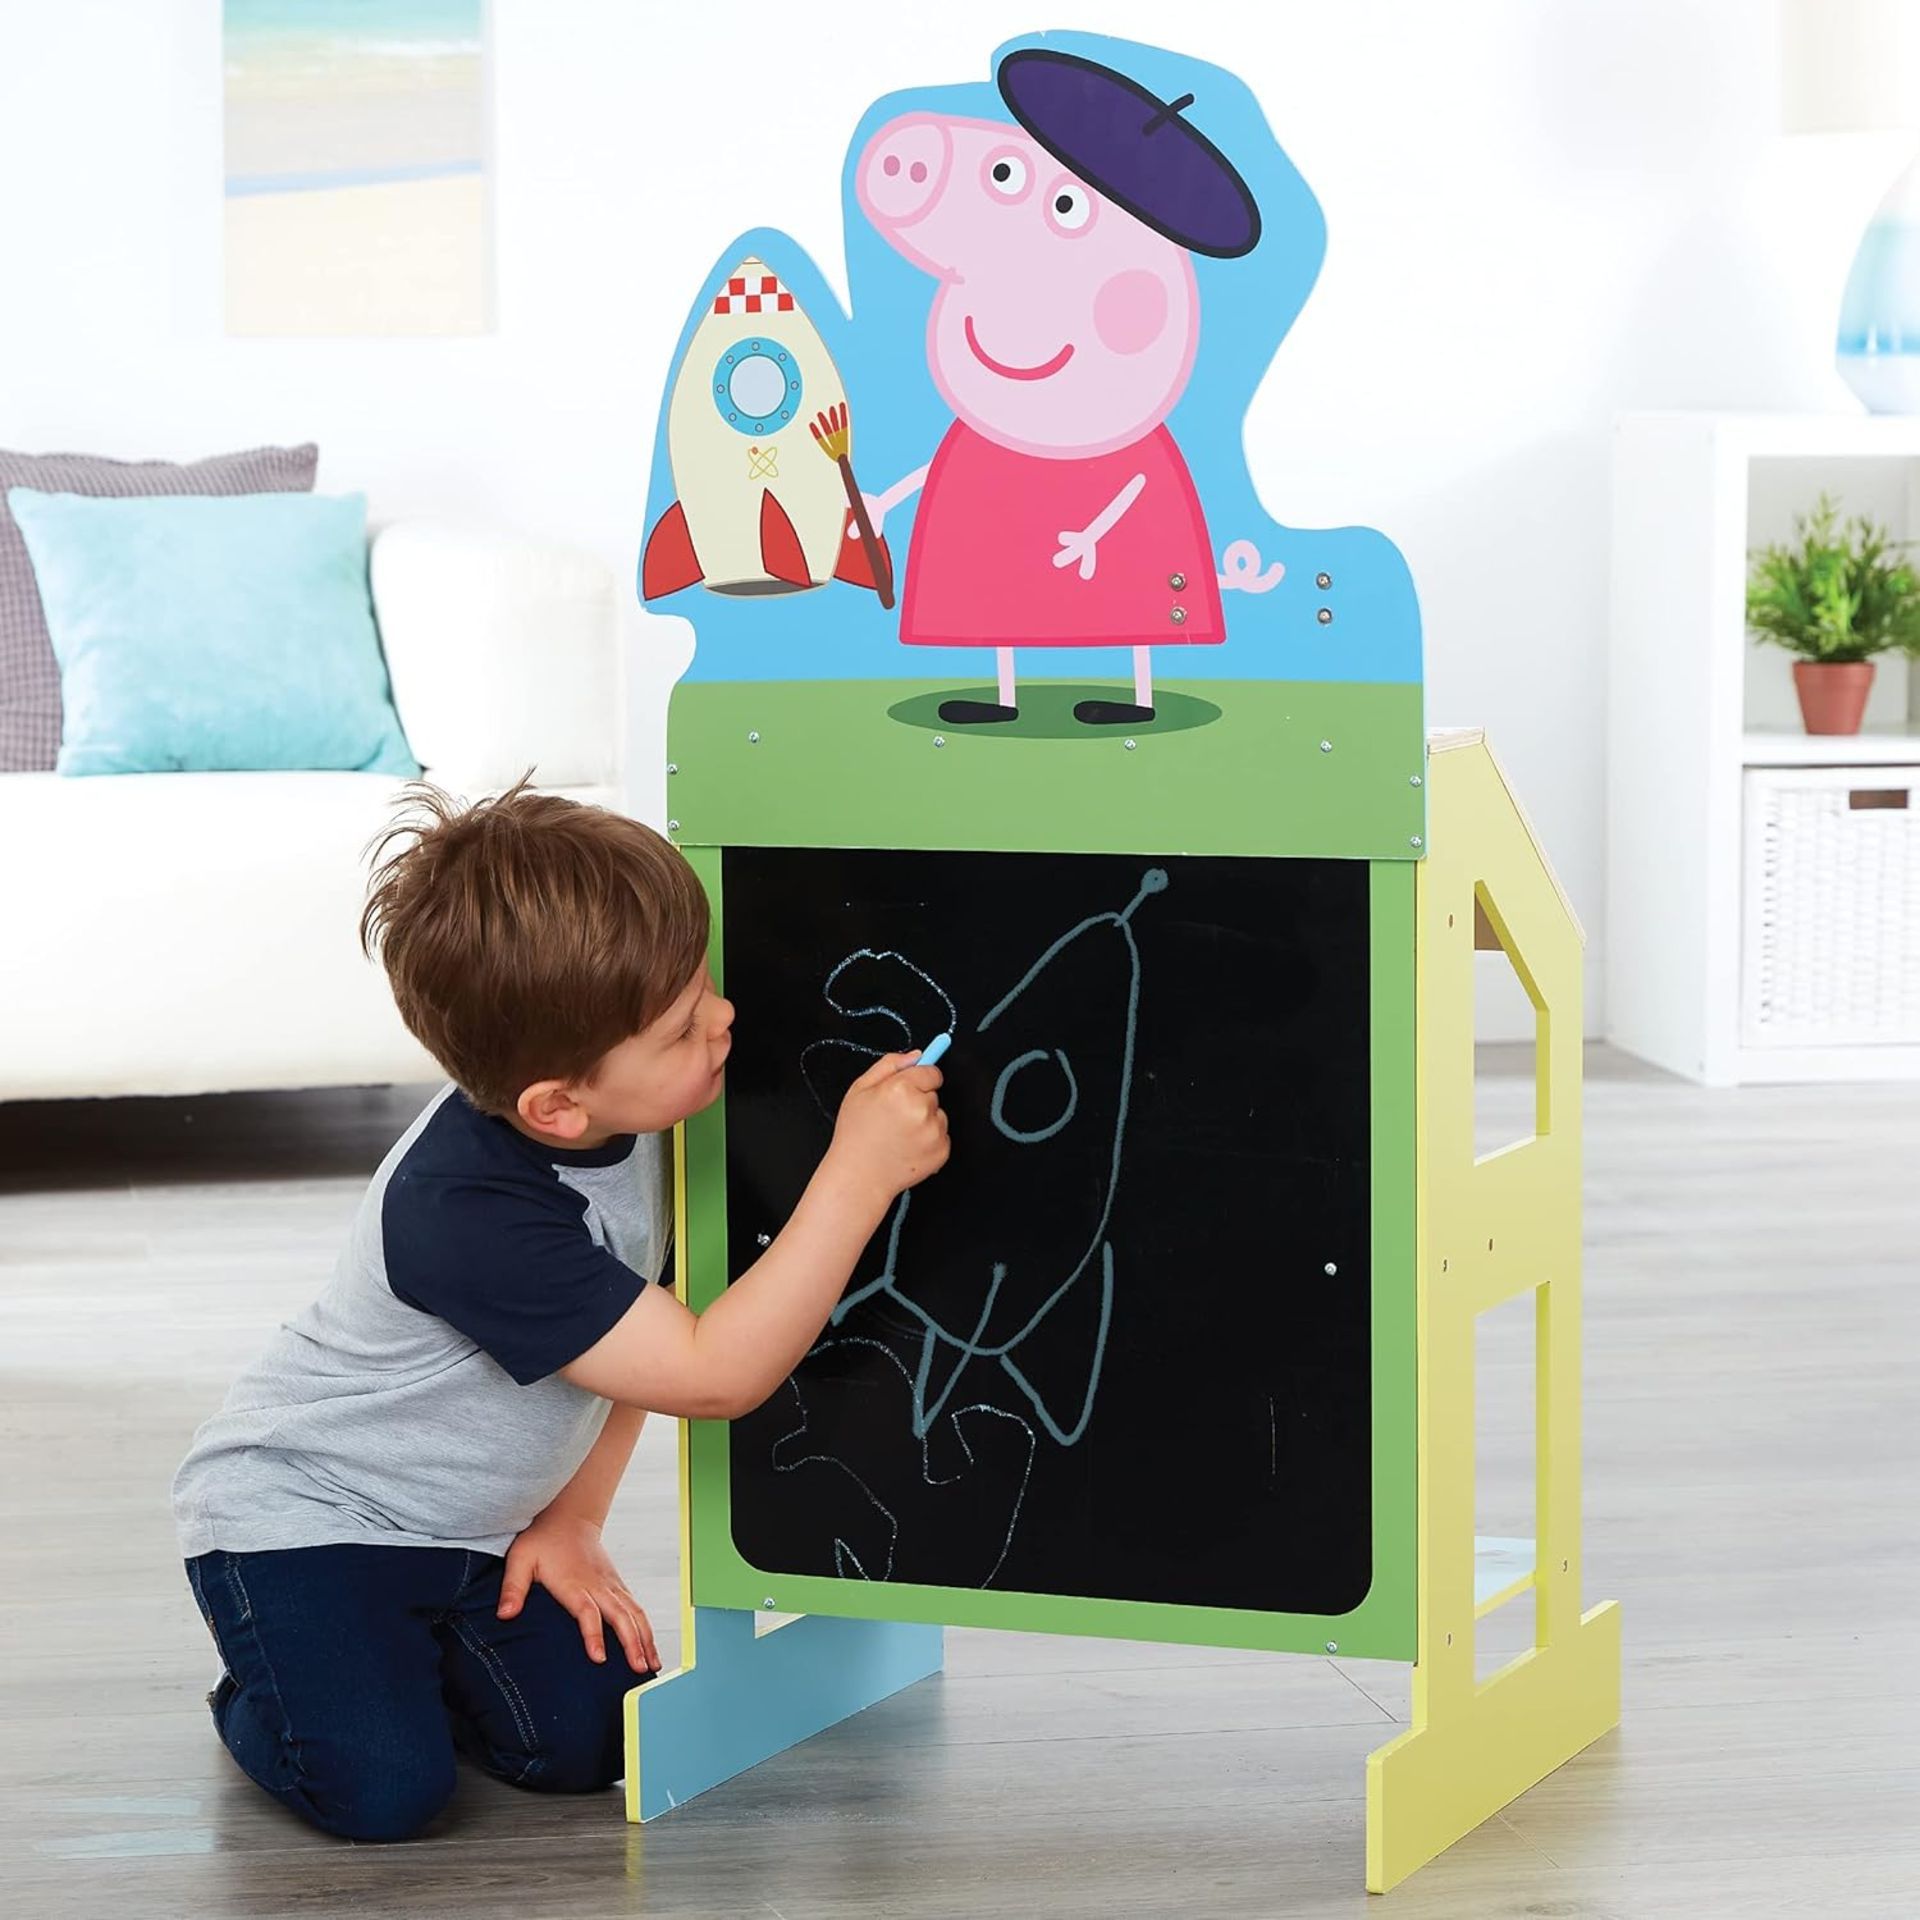 2x NEW & BOXED Peppa Pig Play & Draw Wooden Easel. RRP £69.99 EACH. Peppa's Wooden Play Easel is a - Image 3 of 4